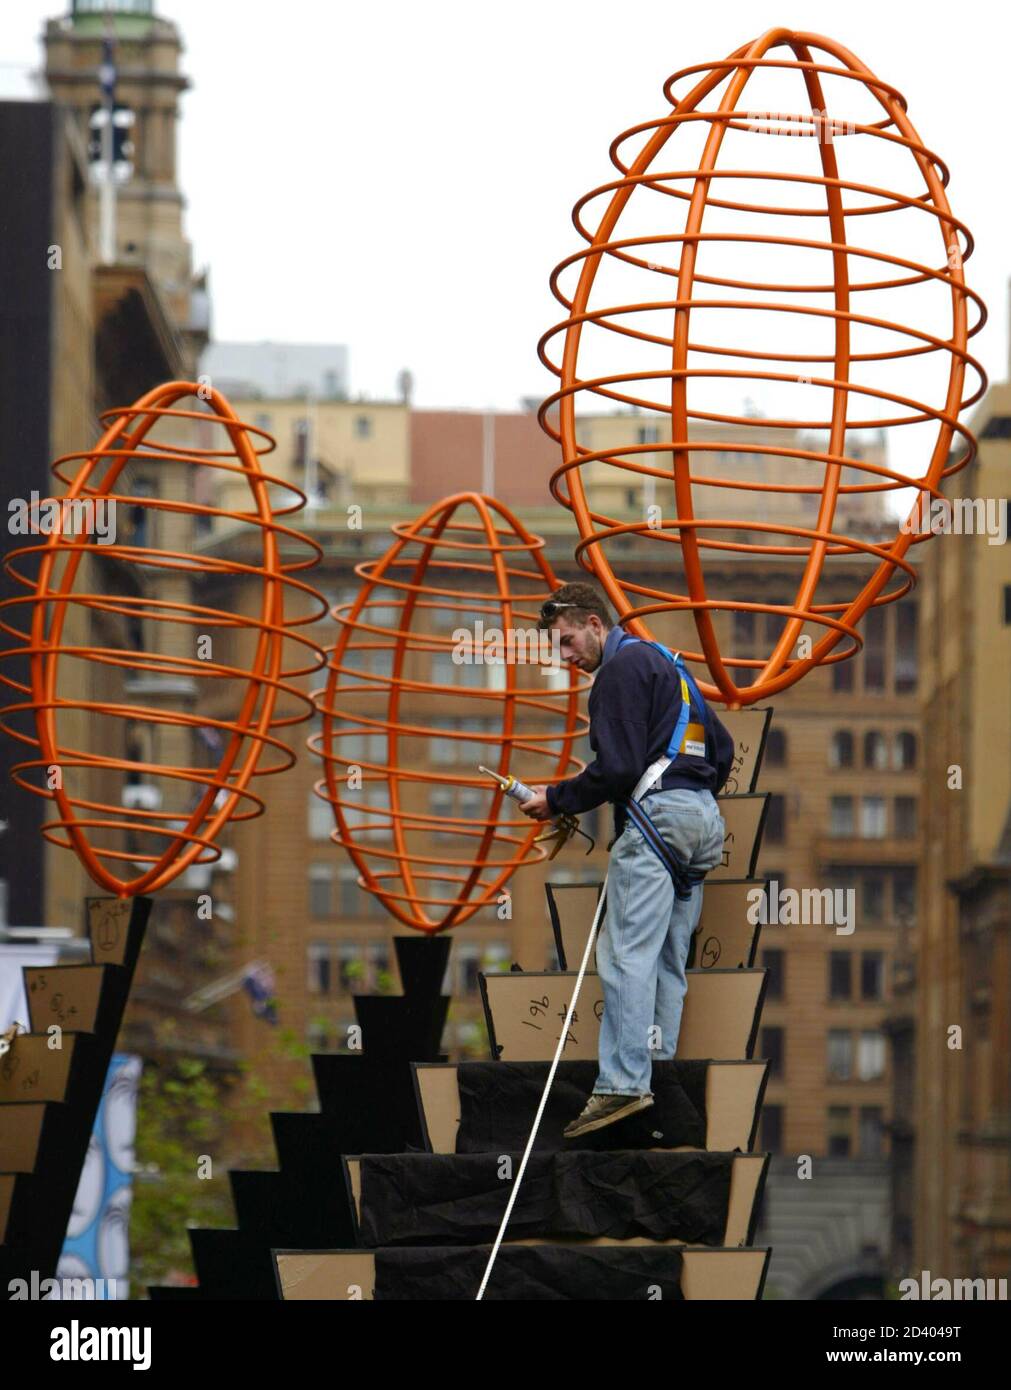 A workman stands amidst an artwork crowned with a stylised steel rugby balls in central Sydney October 6, 2003. The sculpture, one of four, is in the centre of a pedestrian thoroughfare and is designed to promote the Rugby World Cup, a six-week-long rugby tournament contested by 20 nations which starts October 10. REUTERS/Will Burgess  WB/CP Stock Photo